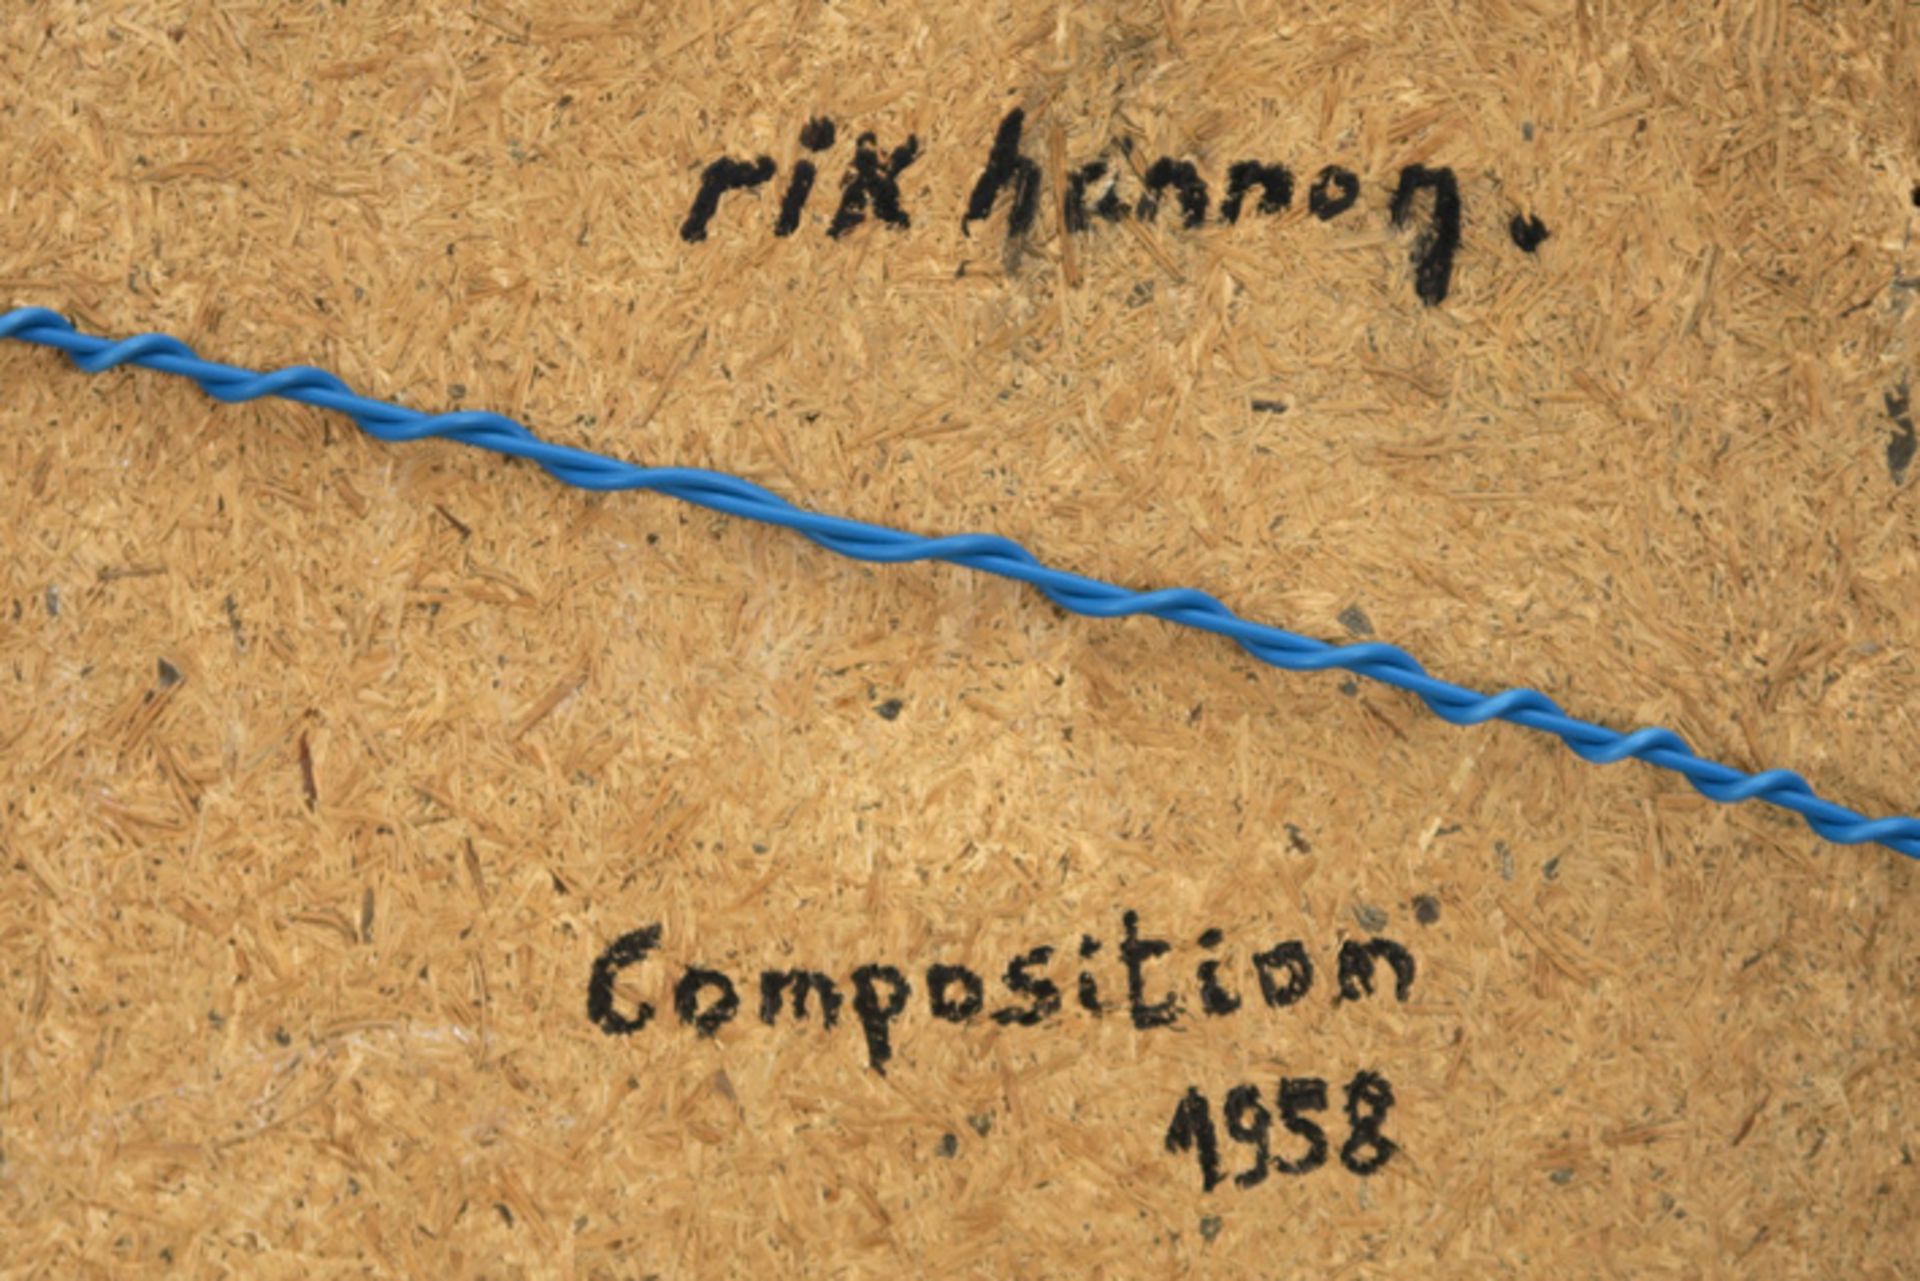 20th Cent. Belgian oil on canvas - signed Rik Hannon and dated 1958 on the back || HANNON RIK ( - Image 4 of 4